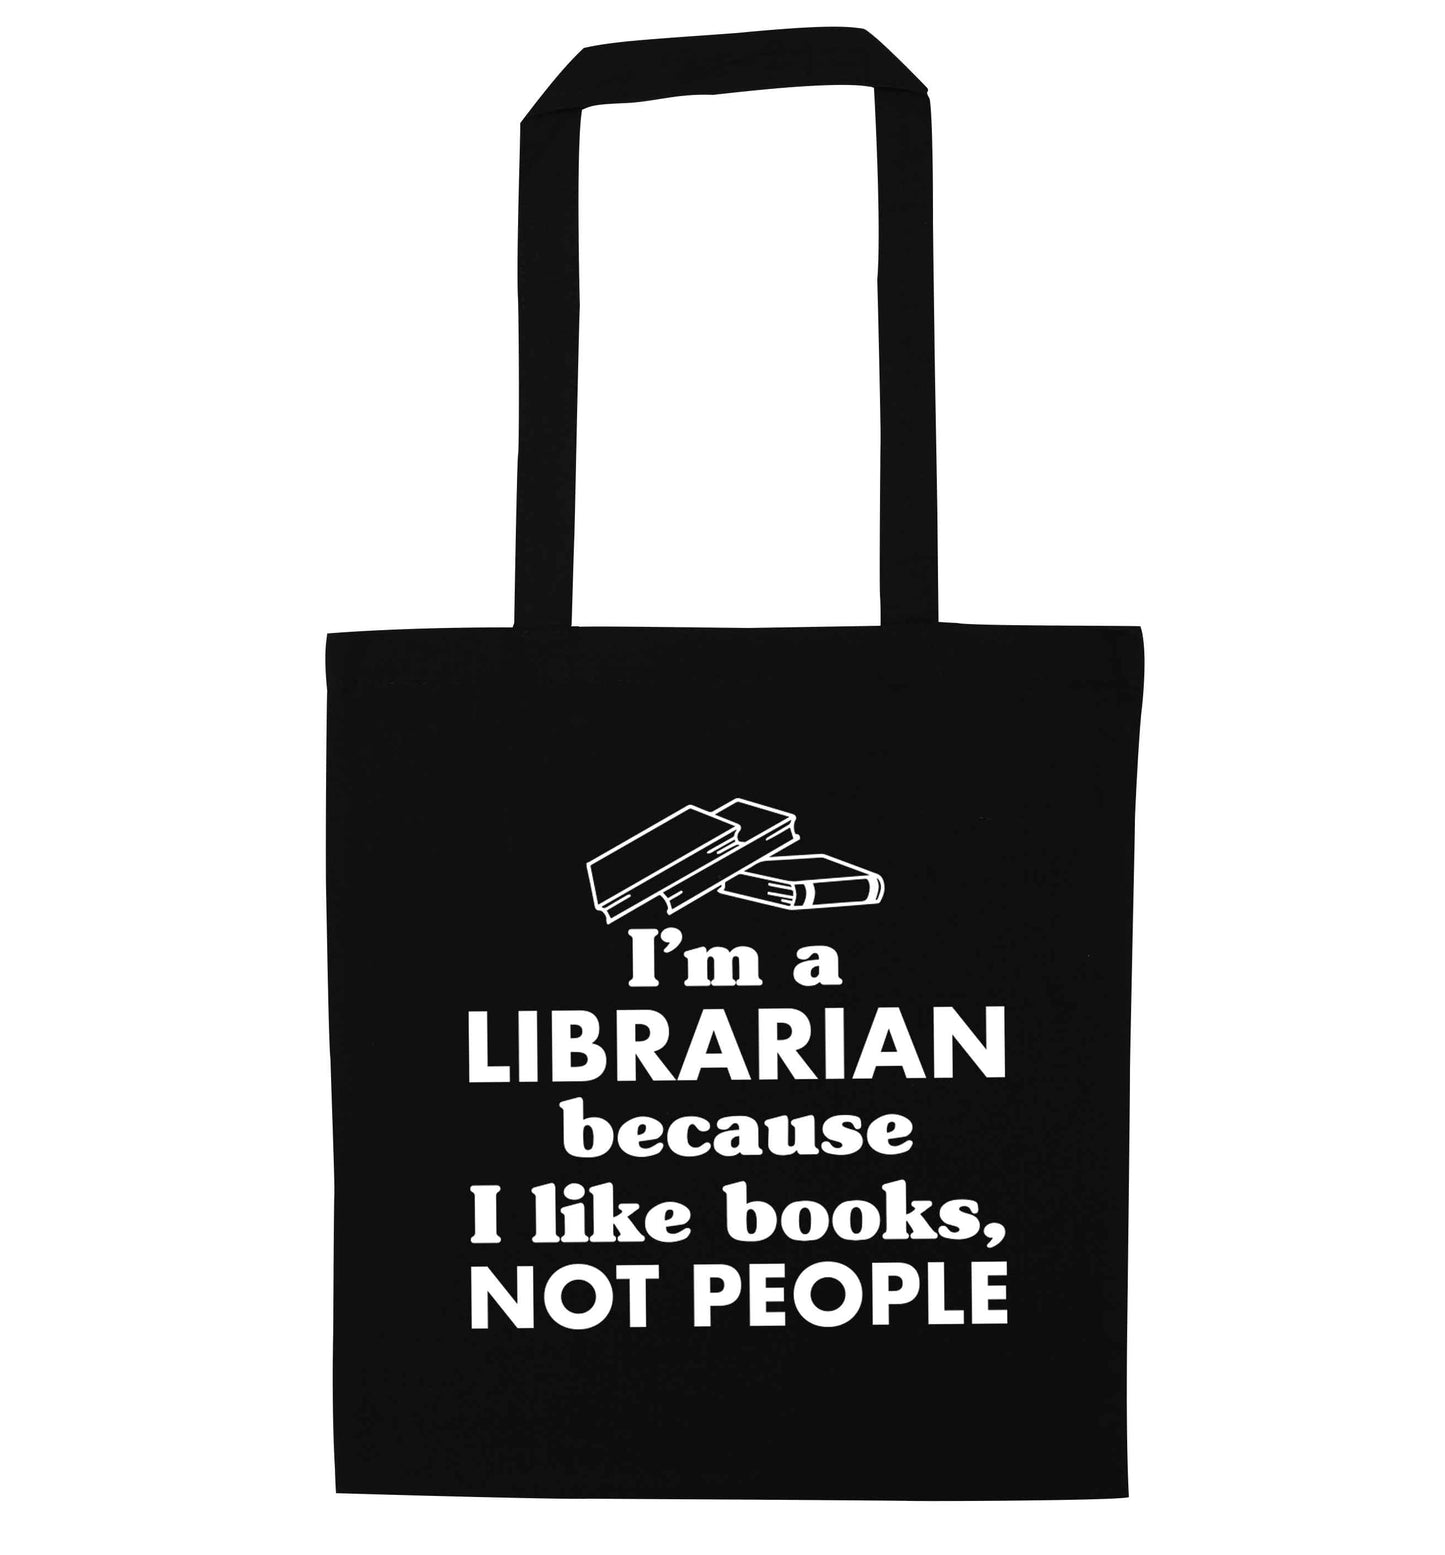 I'm a librarian because I like books not people black tote bag